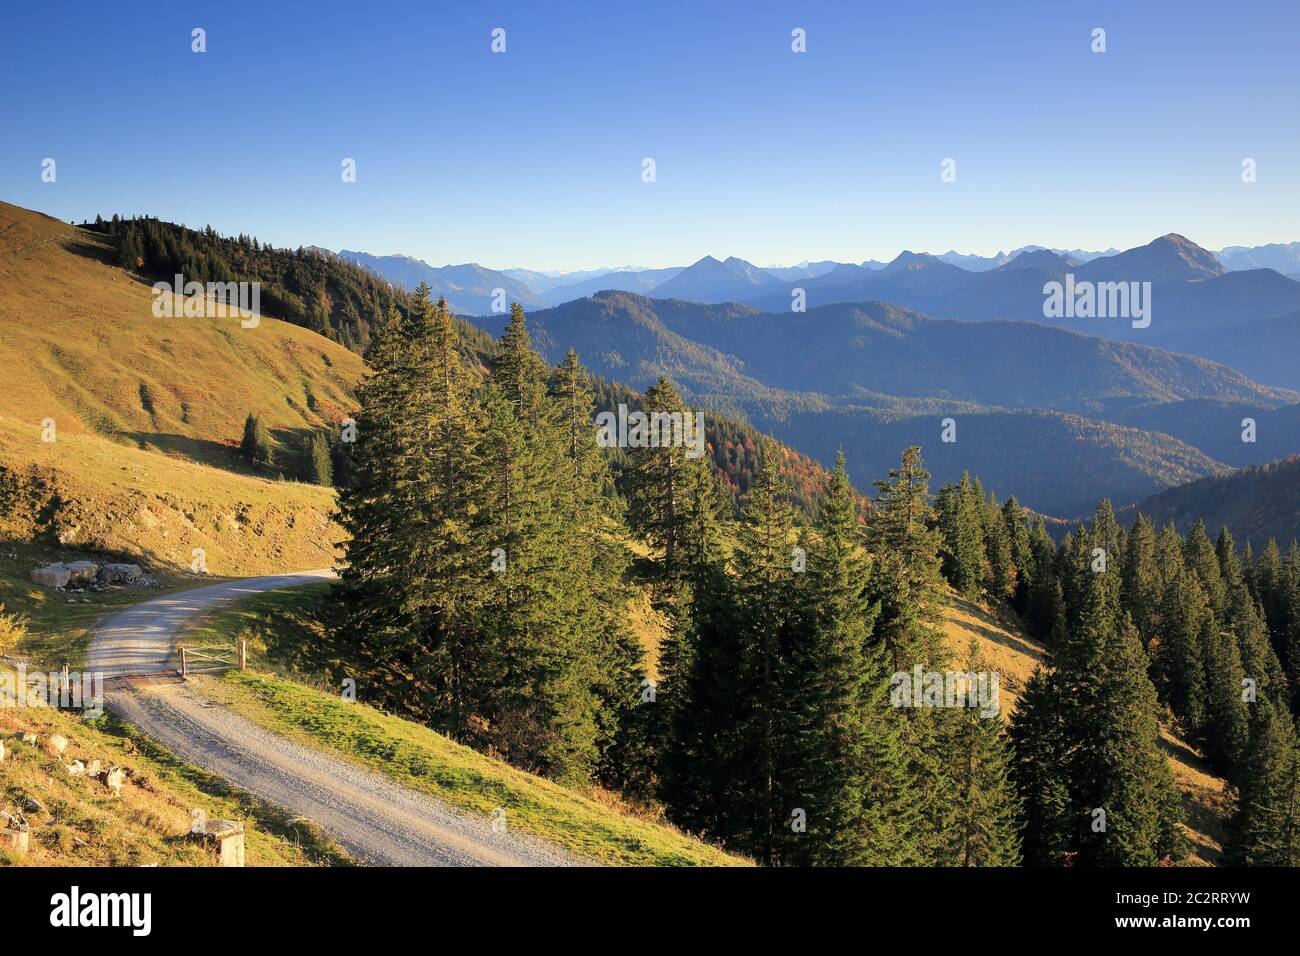 little road in the mountains at evening Stock Photo